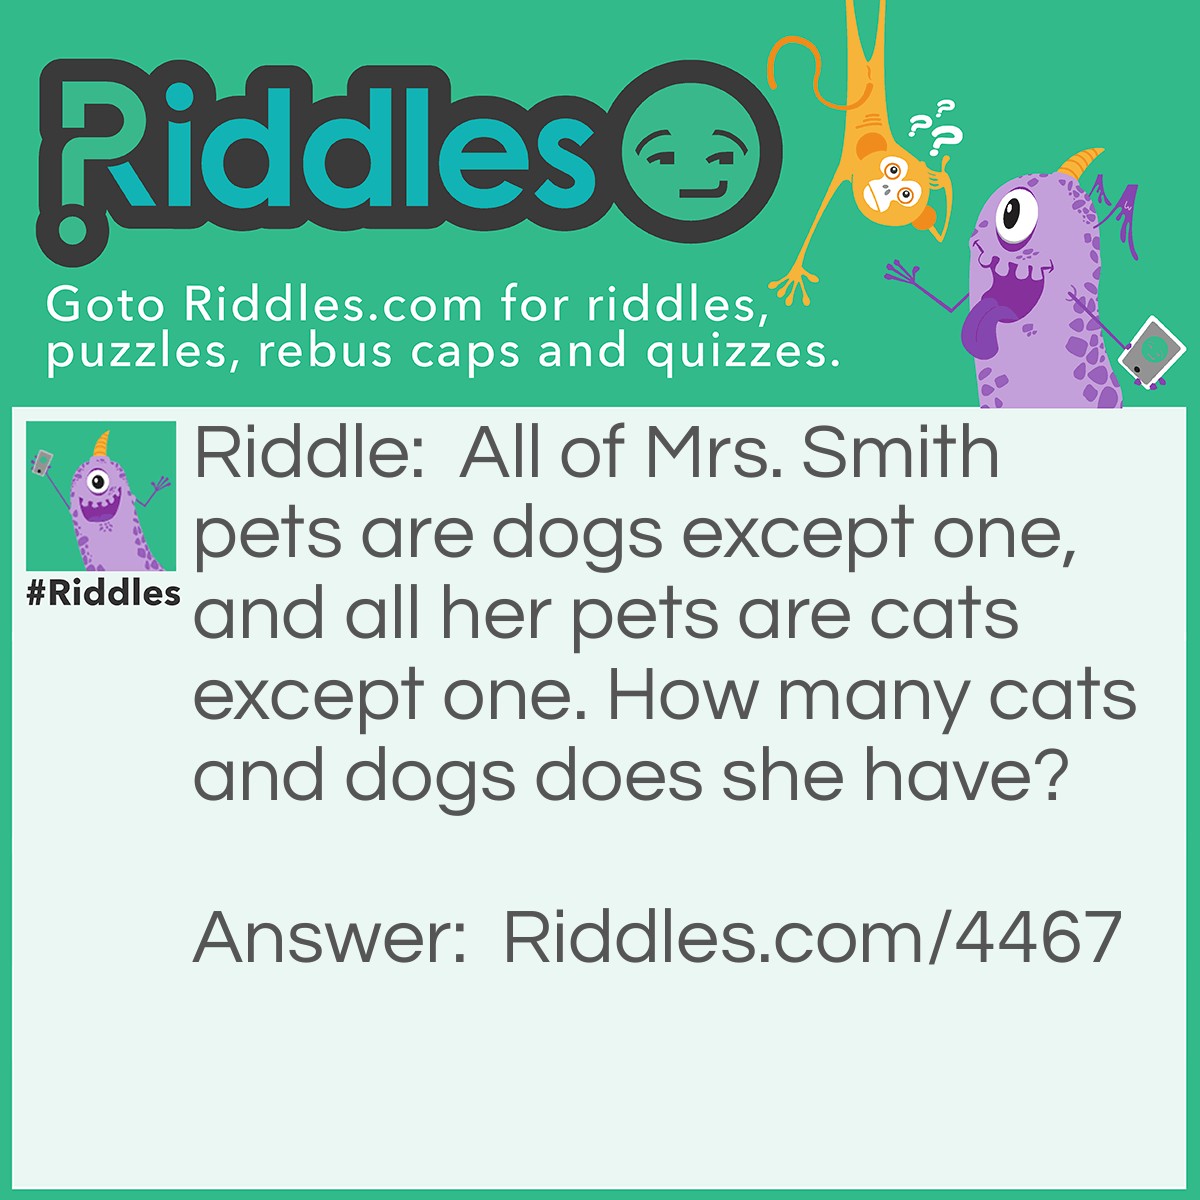 Riddle: All of Mrs. Smith pets are dogs except one, and all her pets are cats except one. How many cats and dogs does she have? Answer: Mrs. Smith has one cat and one dog.